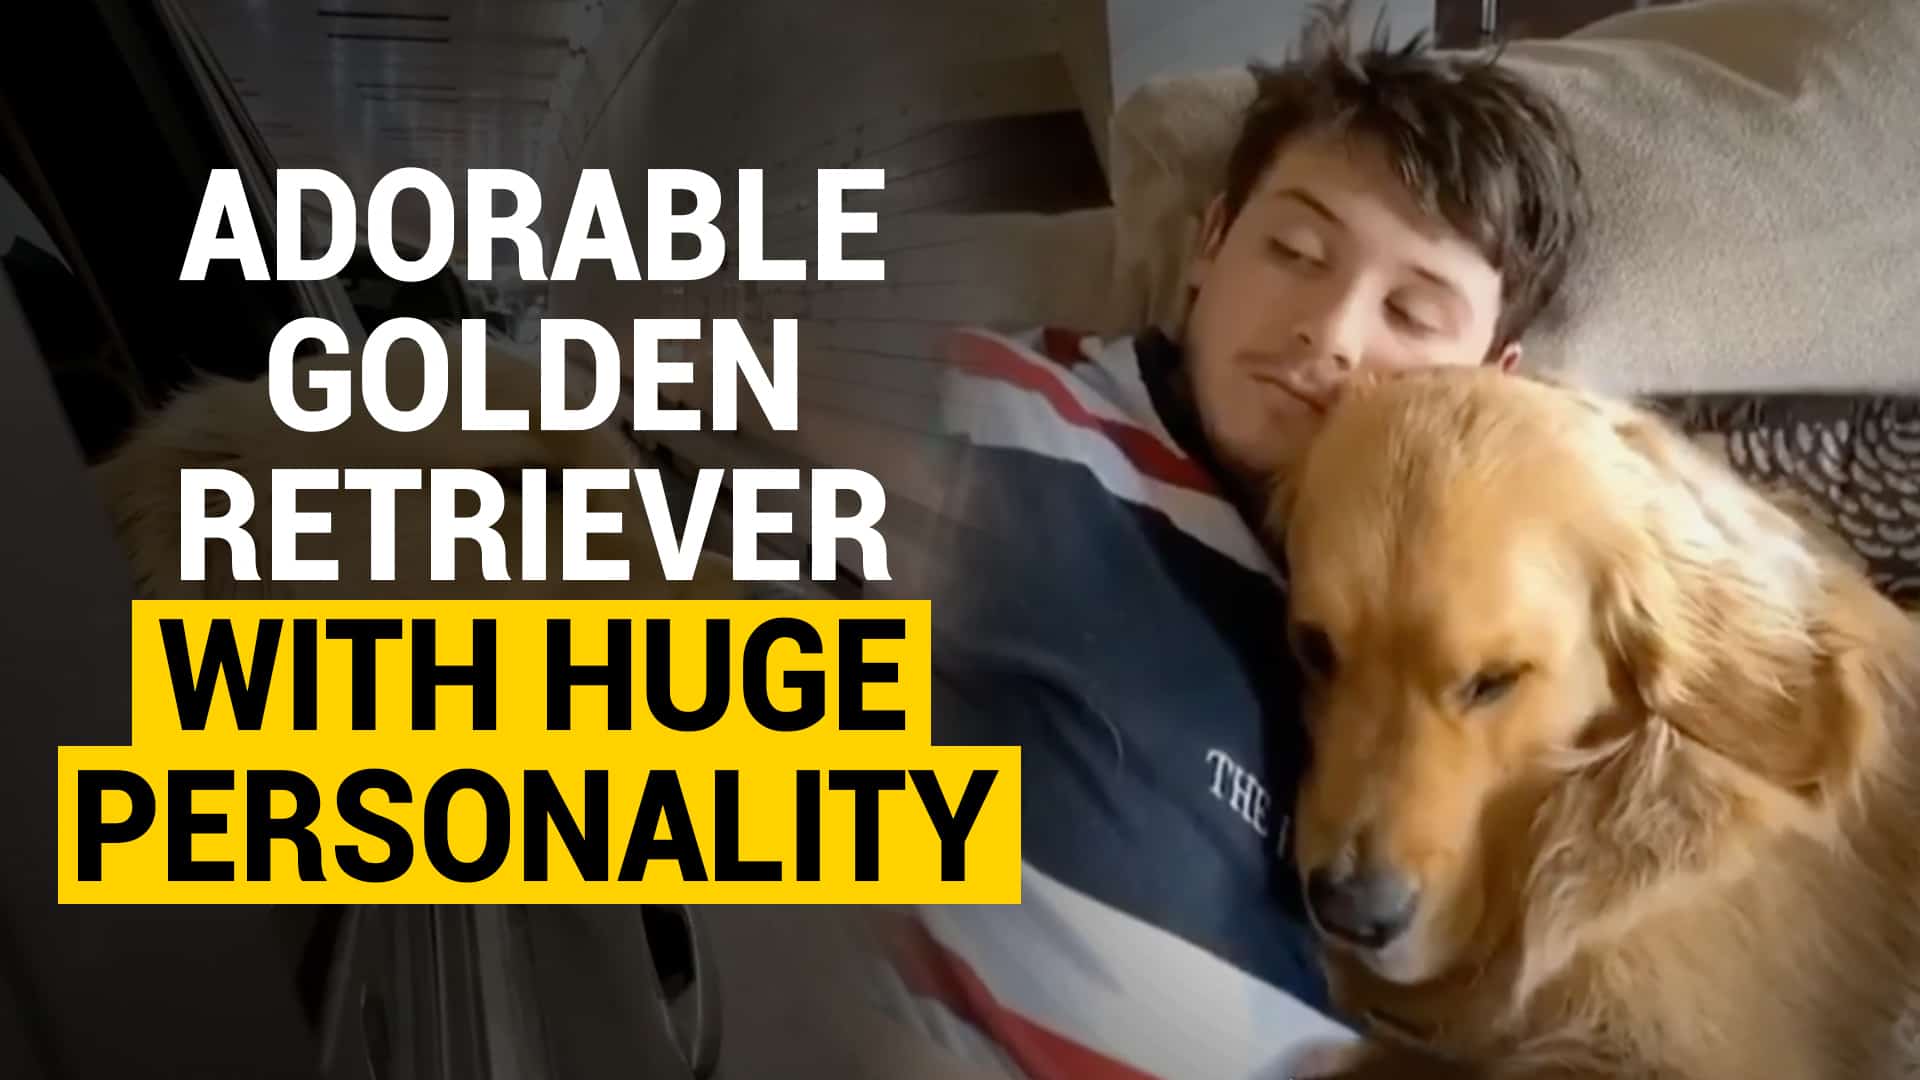 This Adorable Golden Retriever Has a Huge Personality